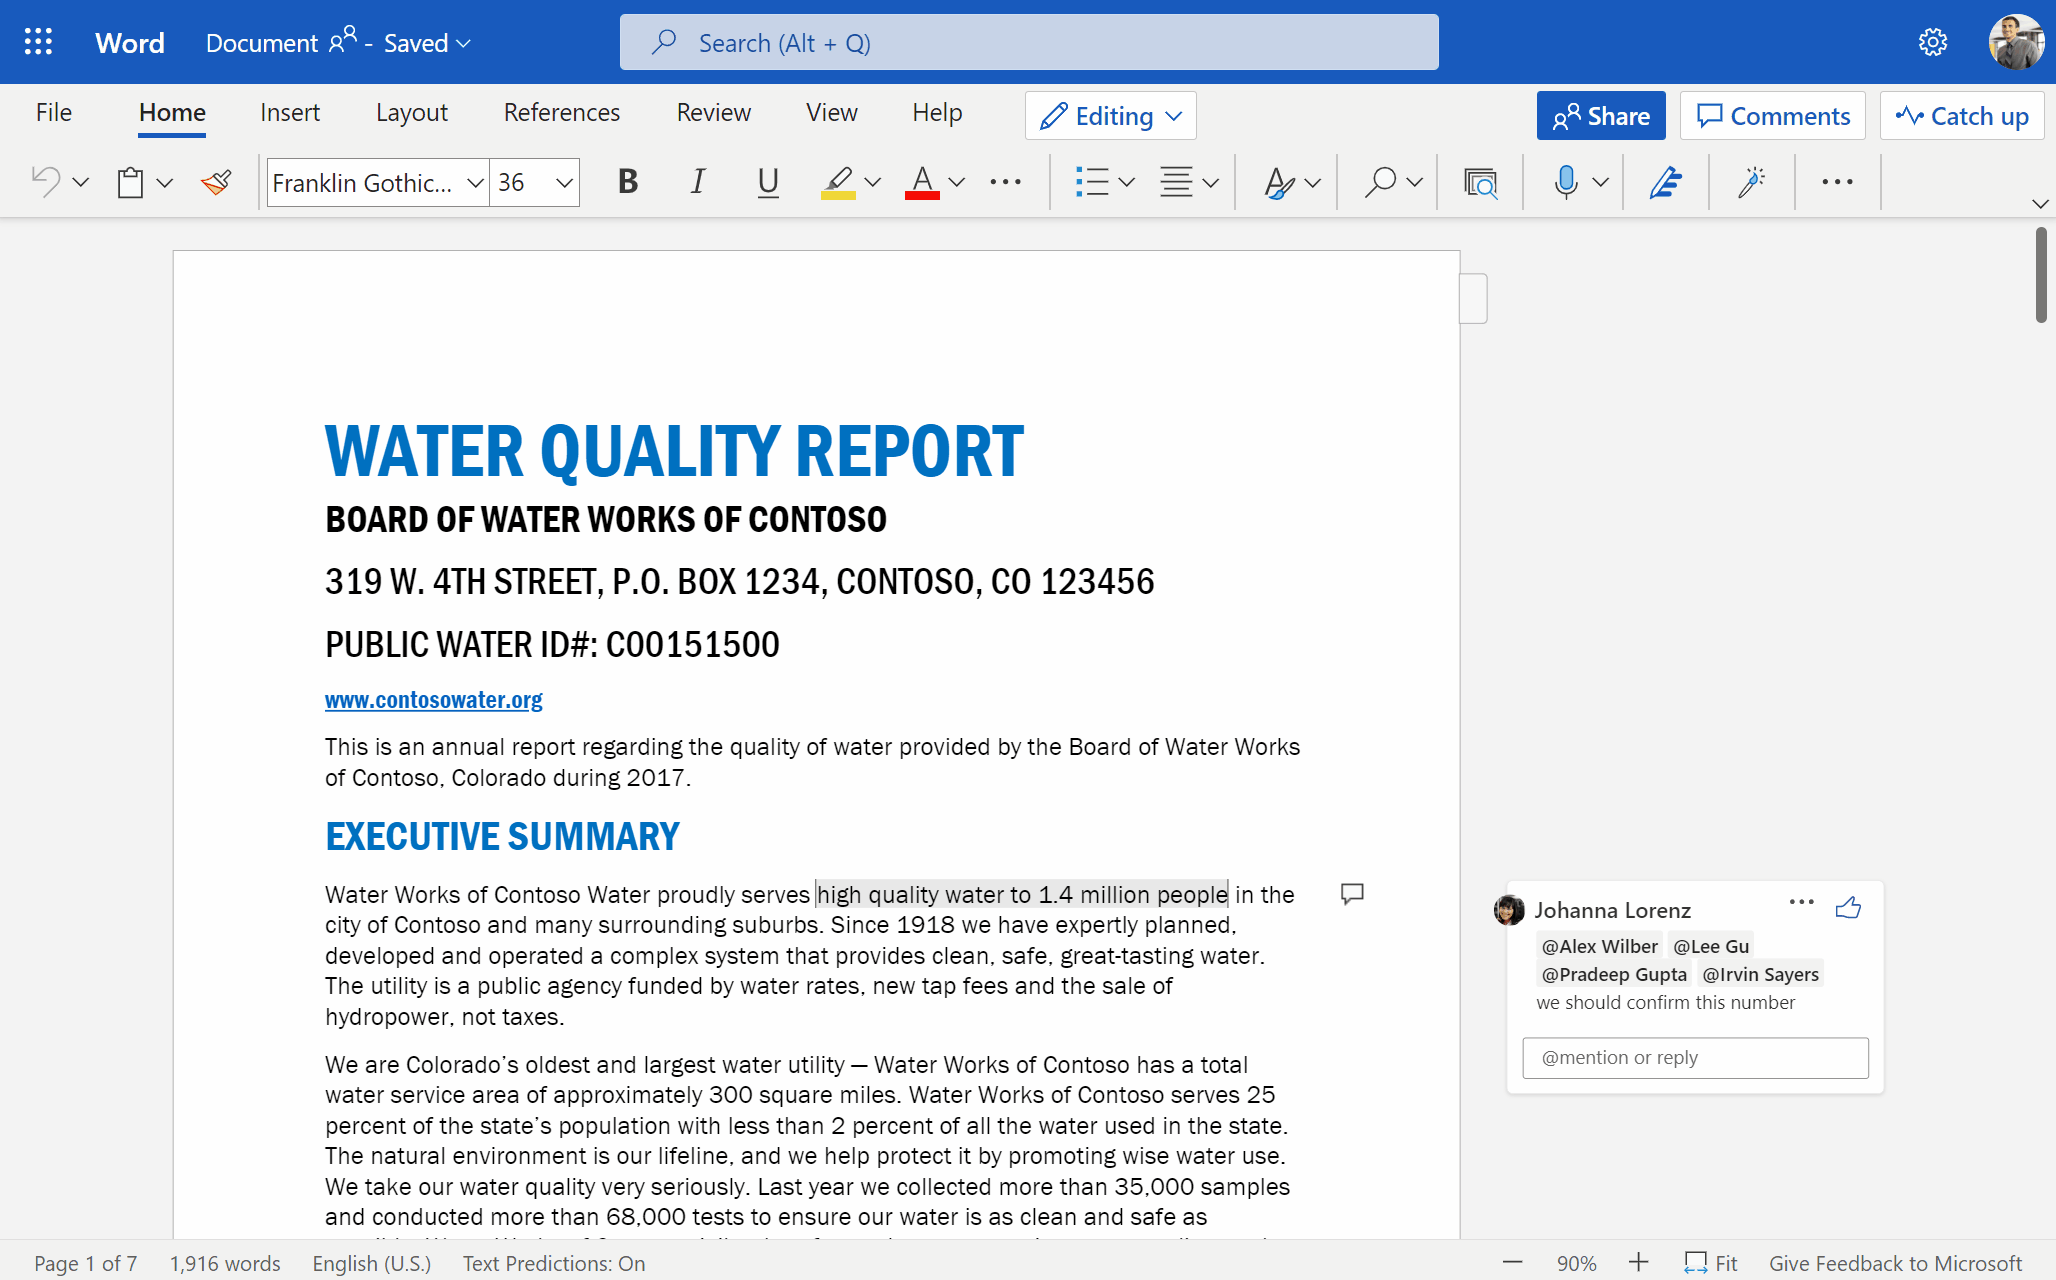 Word document with comments with Like reactions